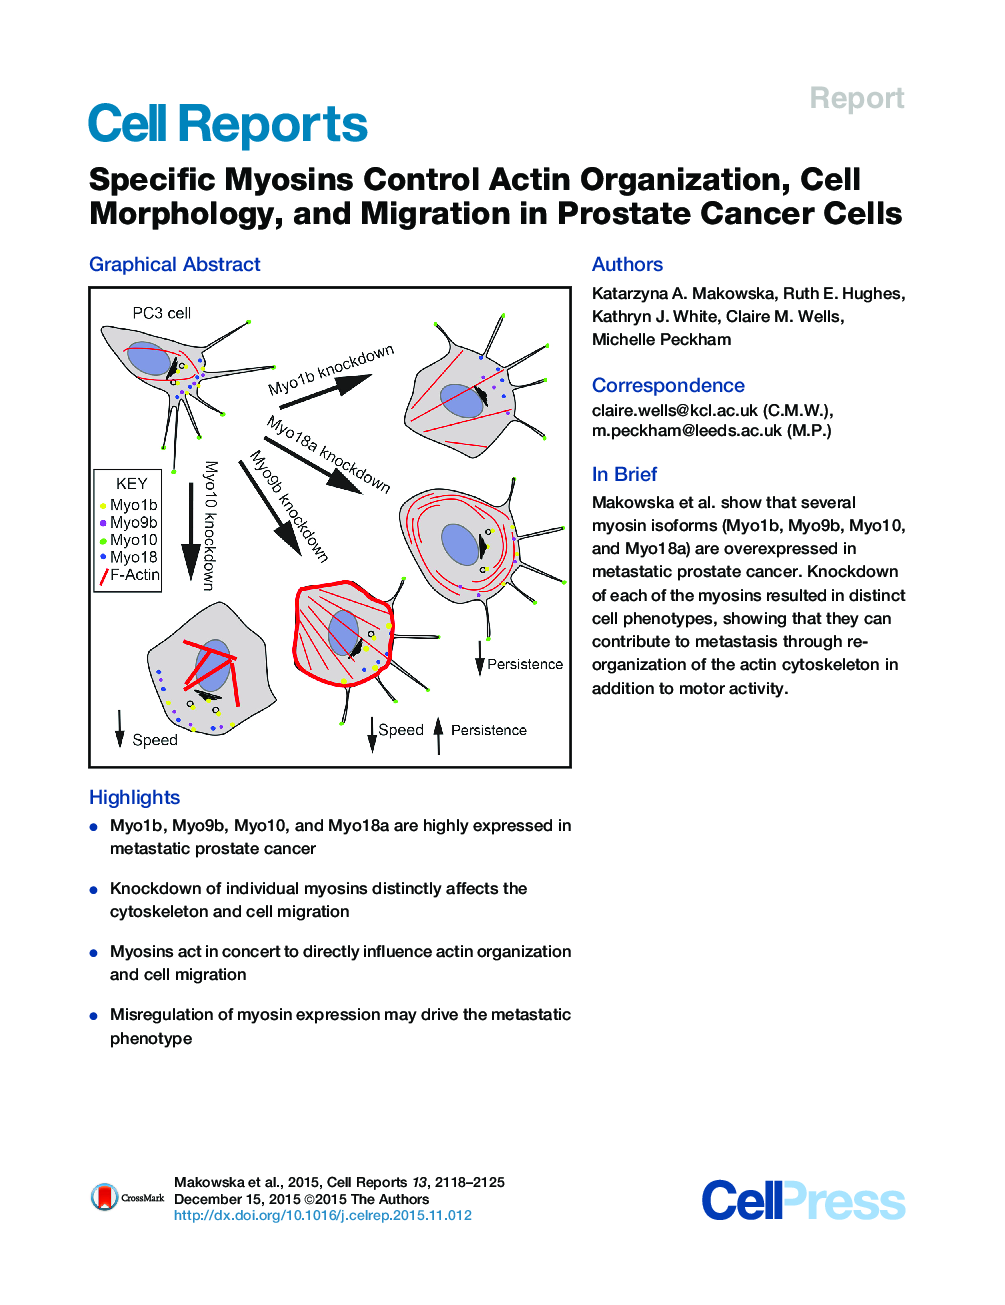 Specific Myosins Control Actin Organization, Cell Morphology, and Migration in Prostate Cancer Cells 